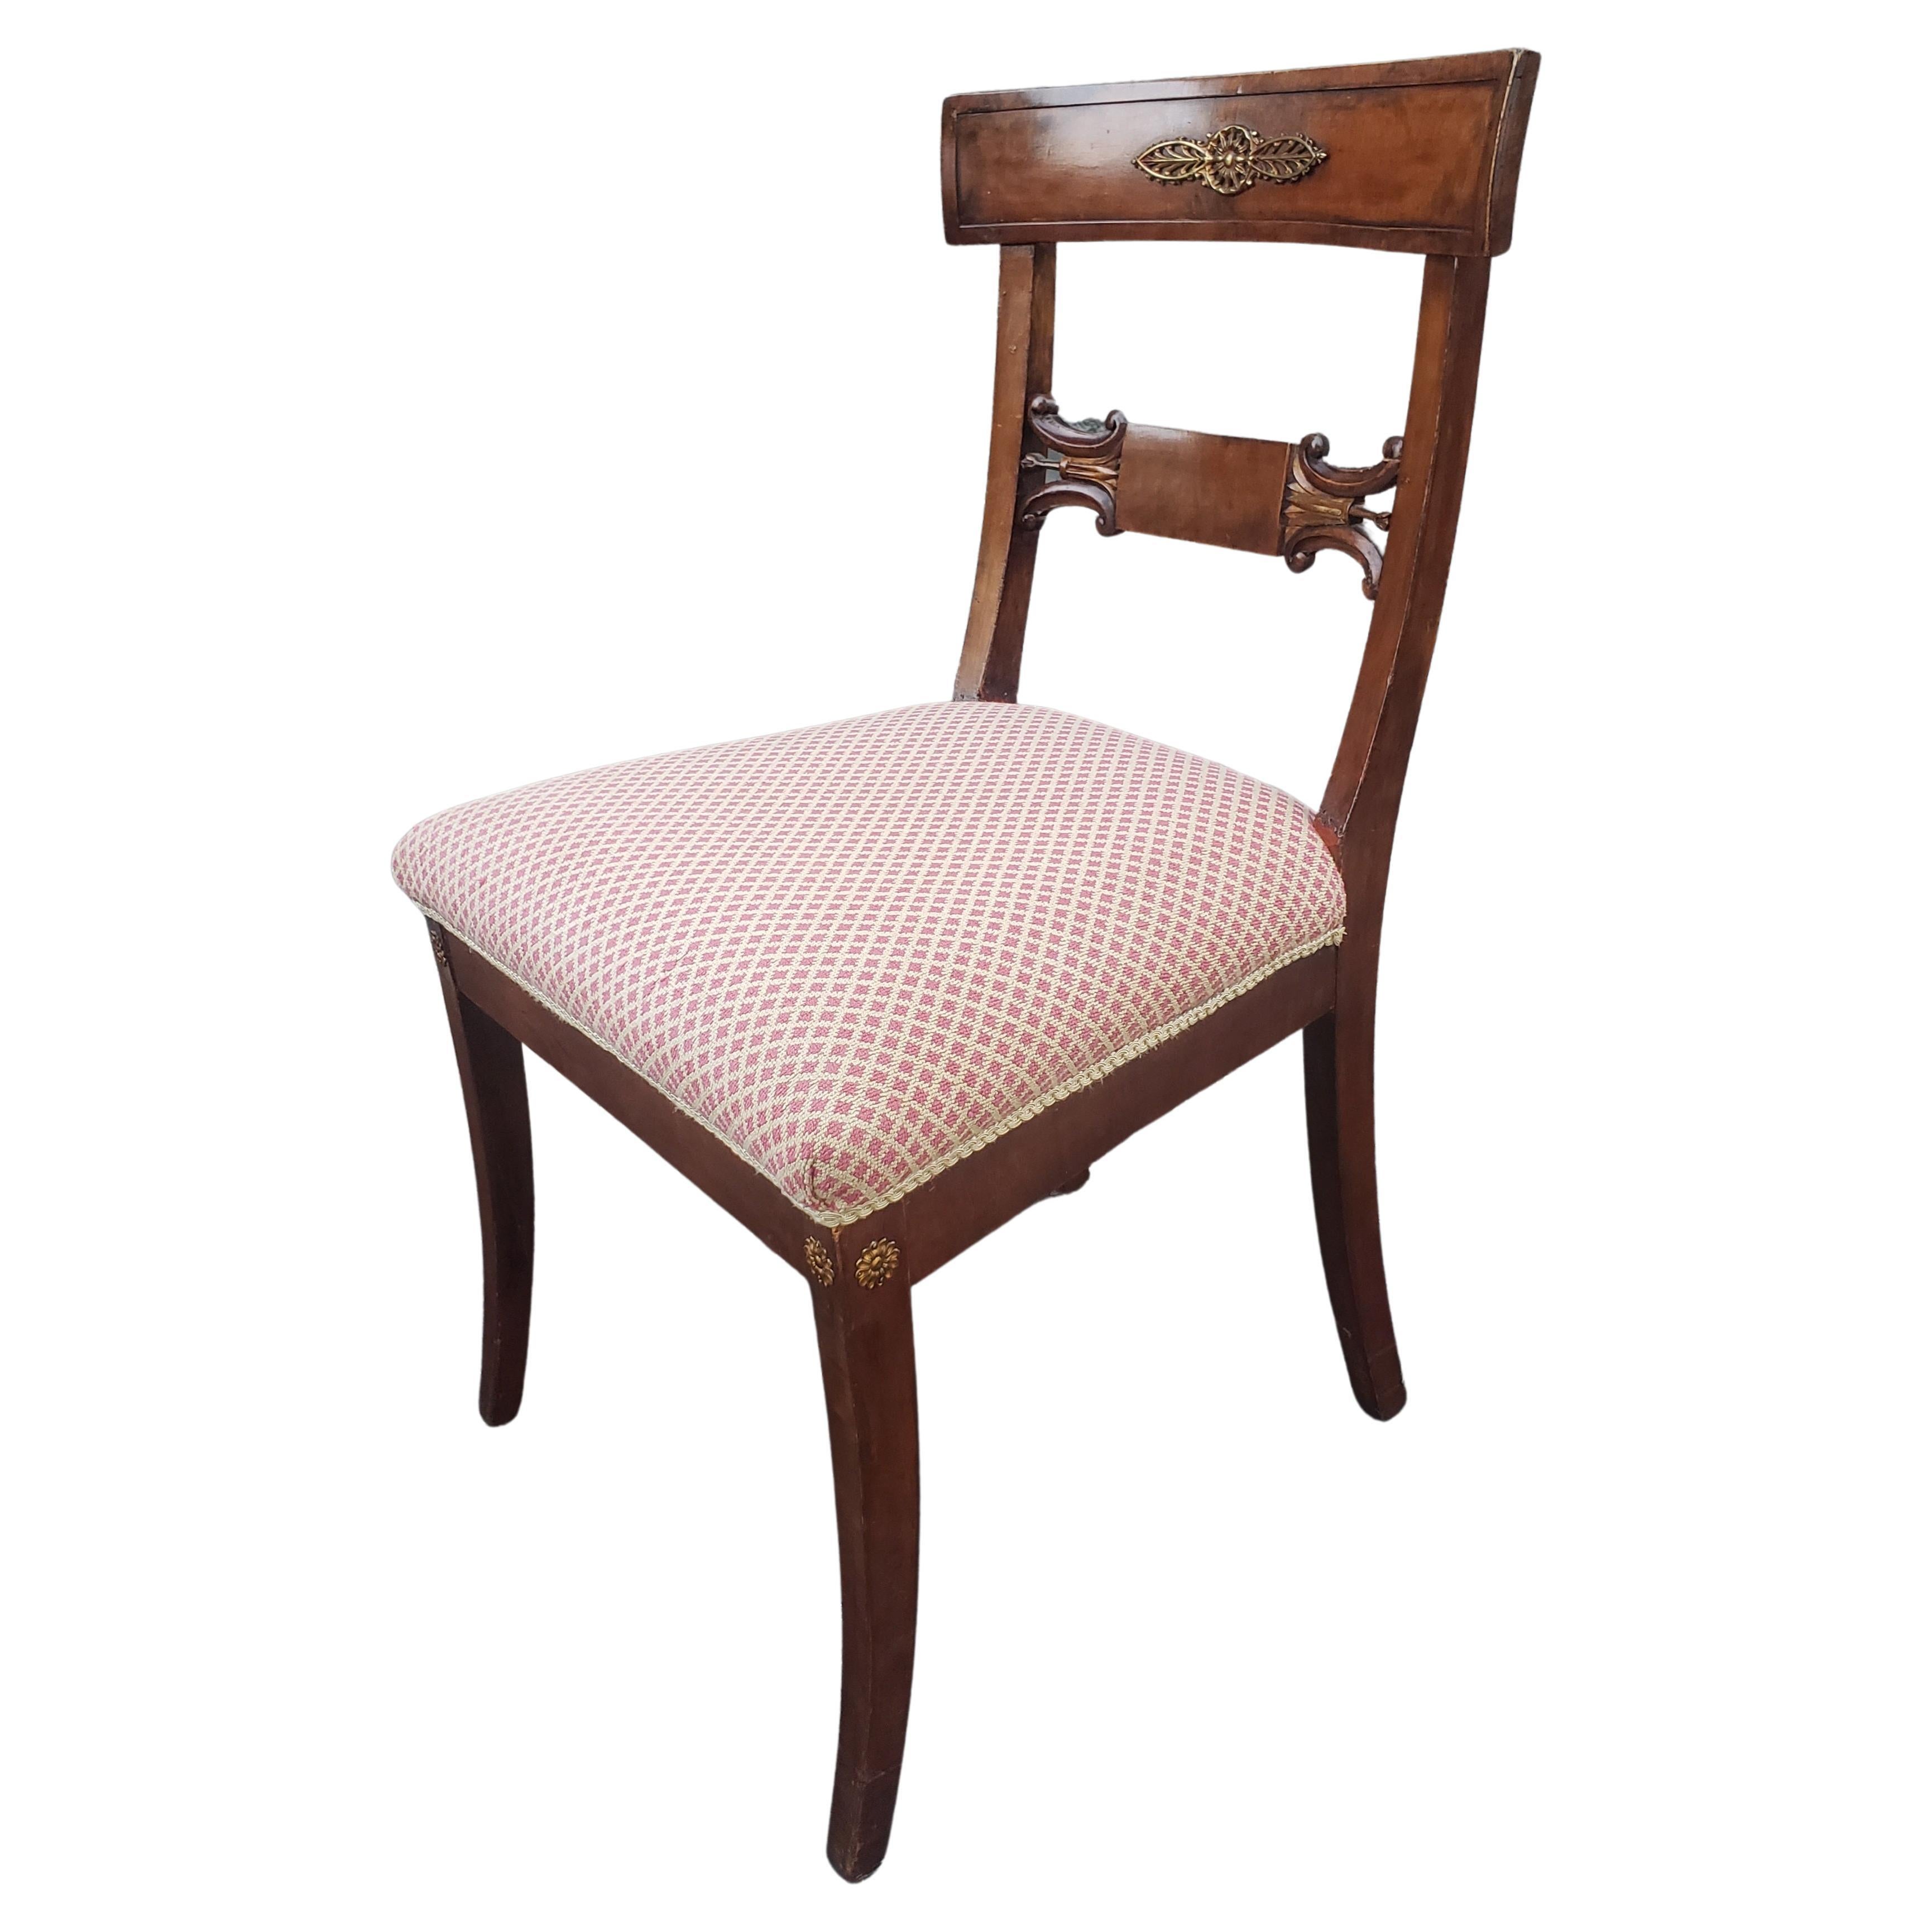 American Empire 19th Century Empire Ormolu Mounted, Partial Gilt Mahogany & Upholstered Chair For Sale